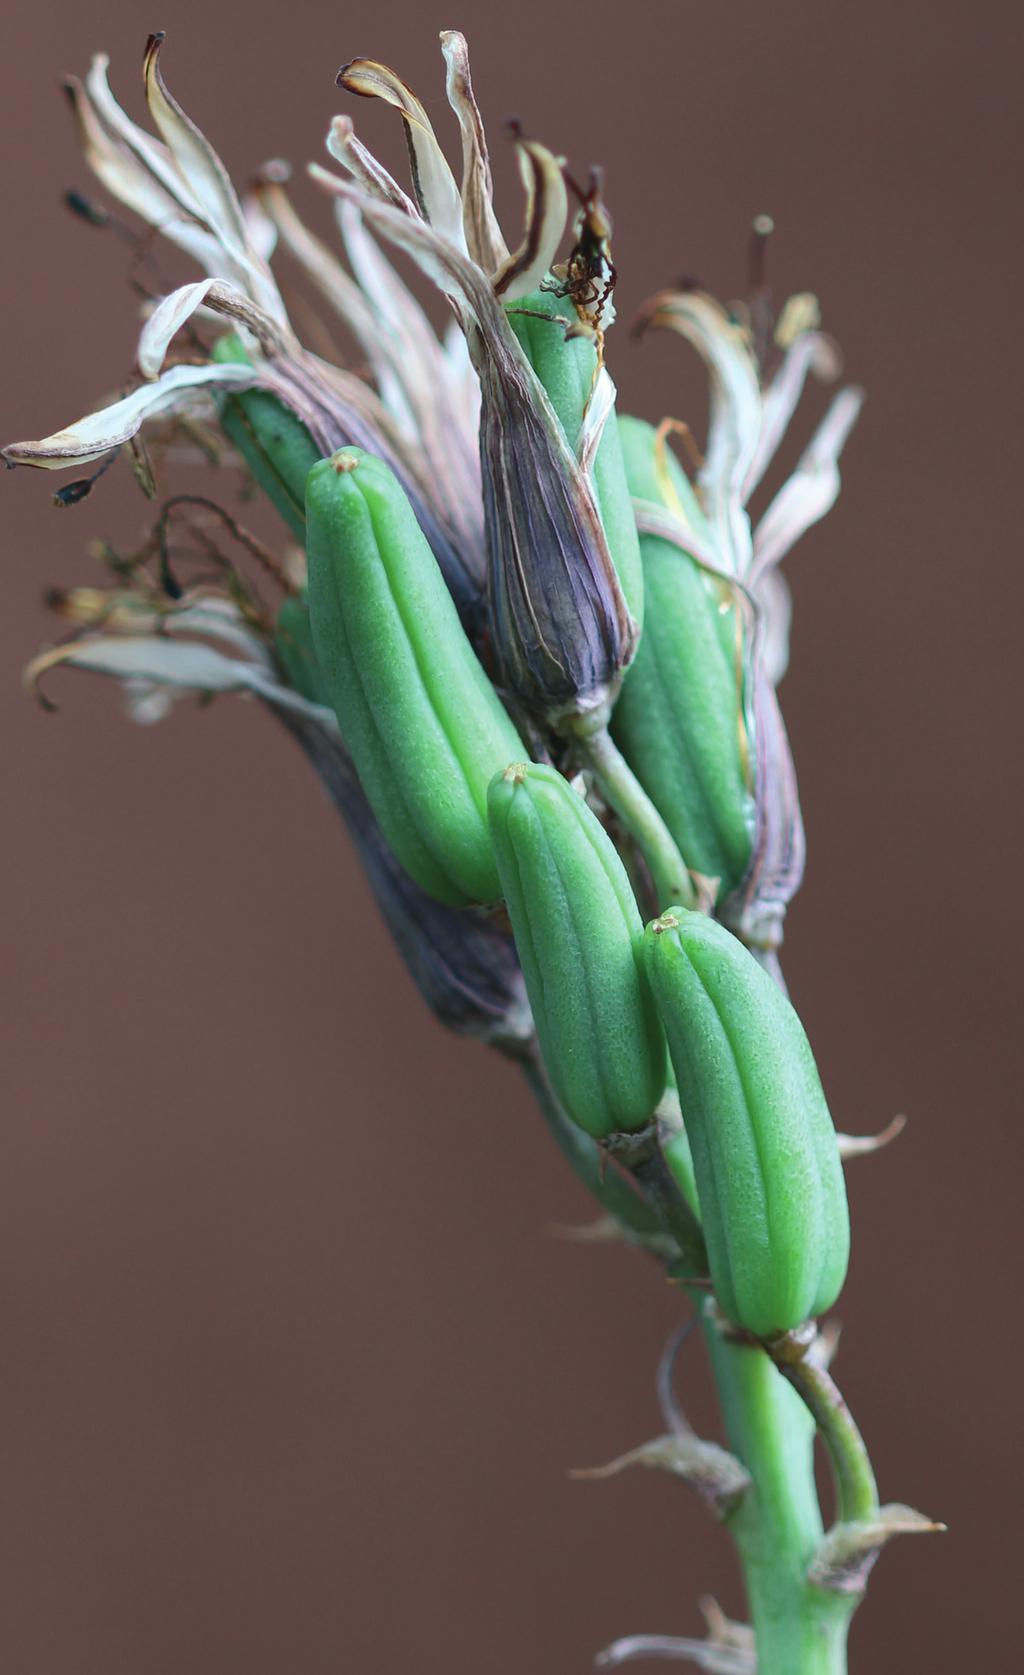 Aloe pulcherrima in cultivation Fig. 3 A. pulcherrima in flower, showing the characteristic U-shaped peduncle I obtained my plant in April 2004 and it has grown steadily since then (Fig. 1).